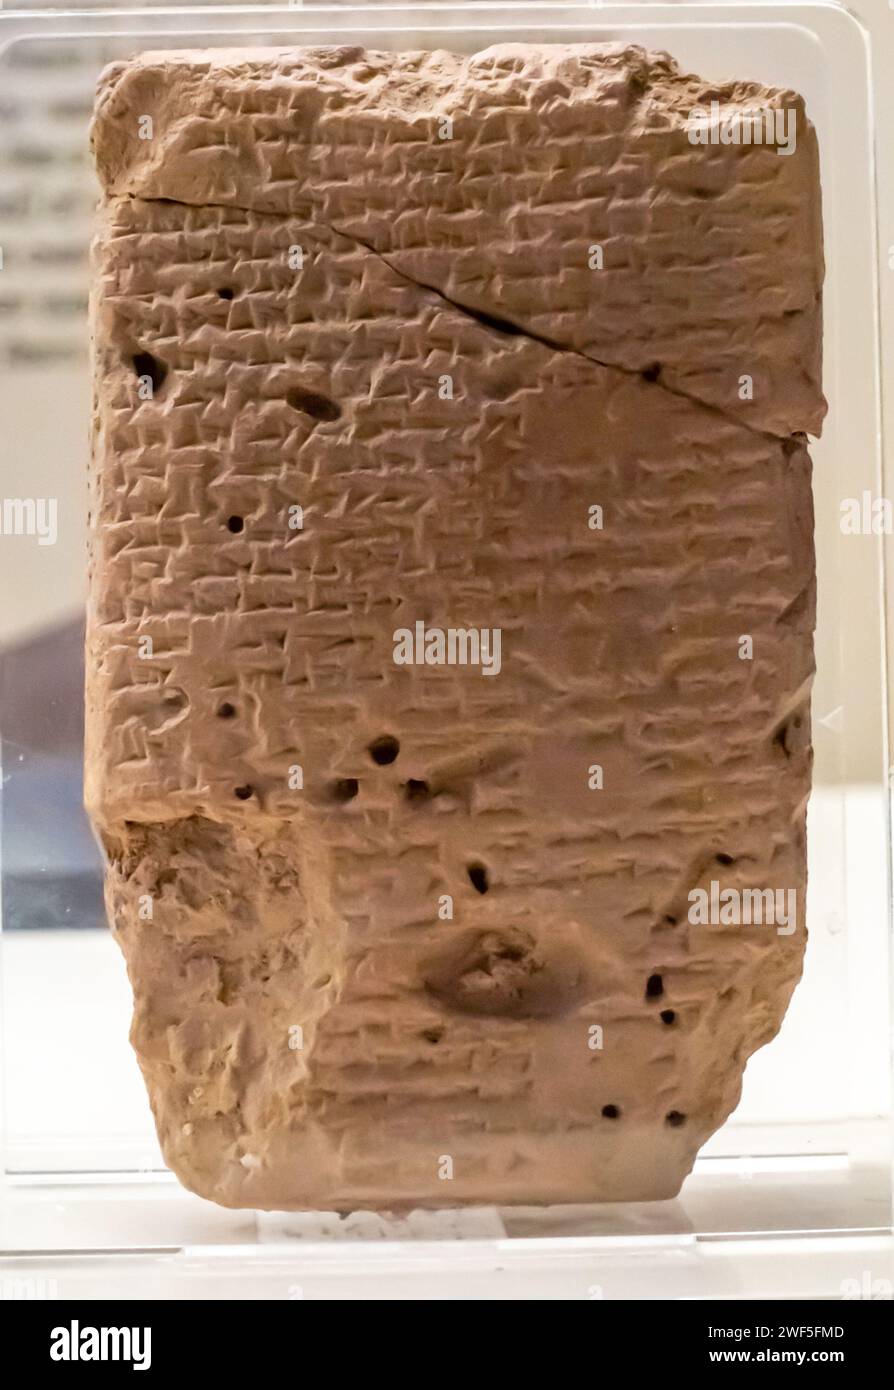 Text about Ersamma prayer in the honor of Marduk followed by Ersemma prayer, terracotta, New Asur, Sultantepe Sultan tepe, Neo-Assyrian Period Stock Photo